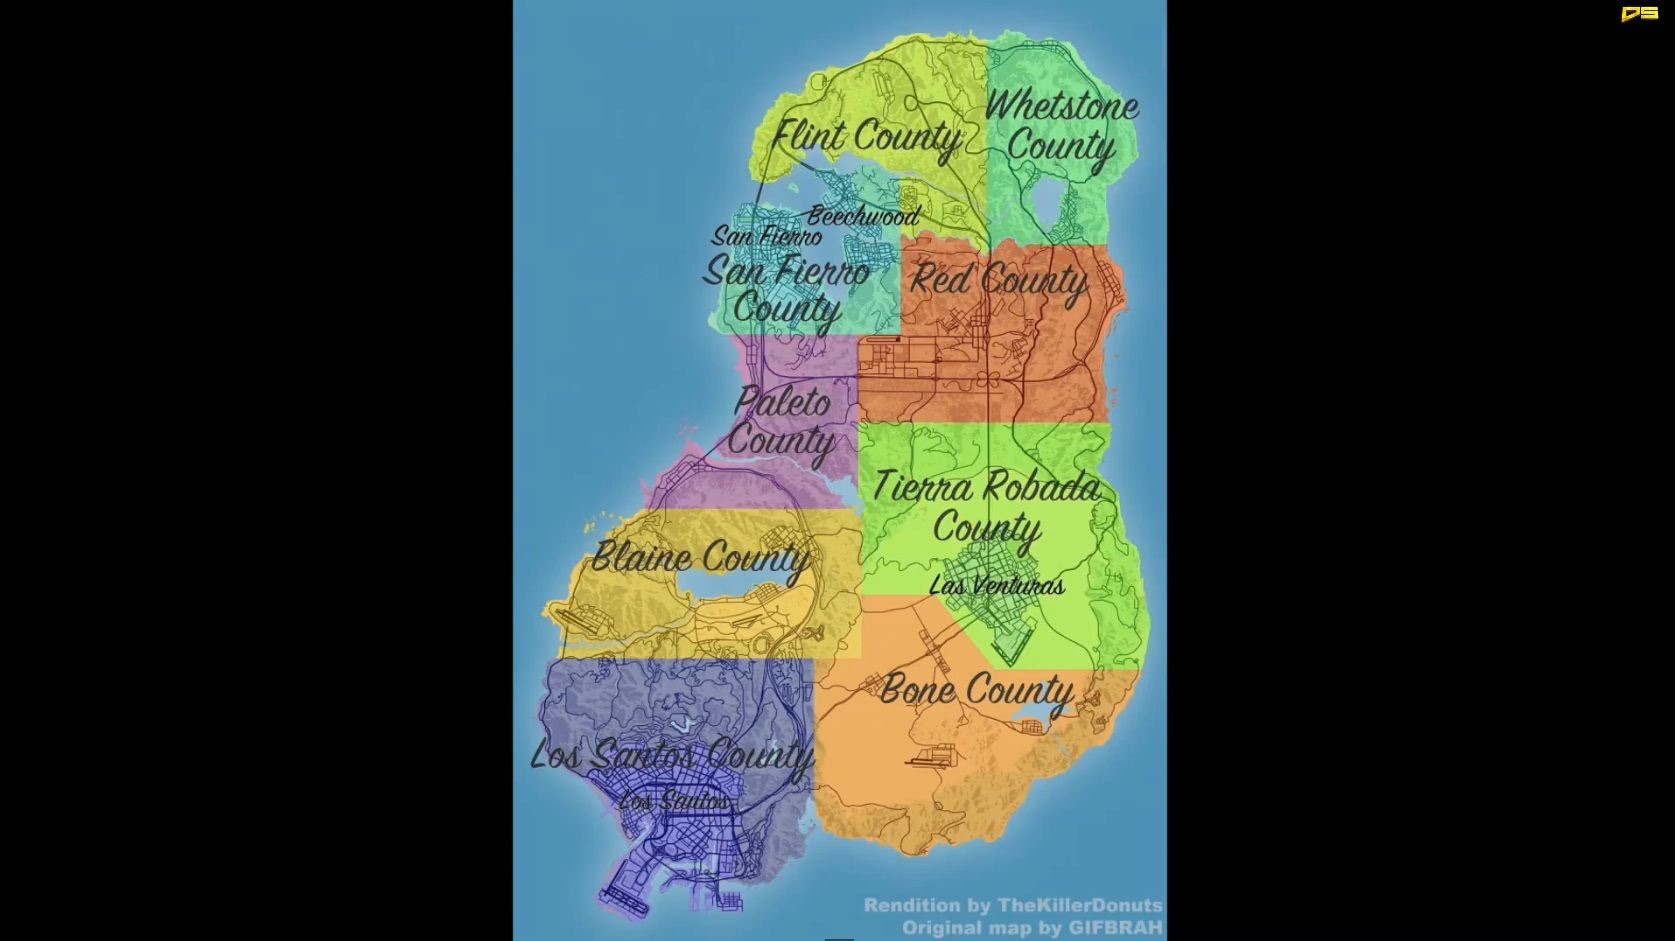 Gta 5 map updated with names :)